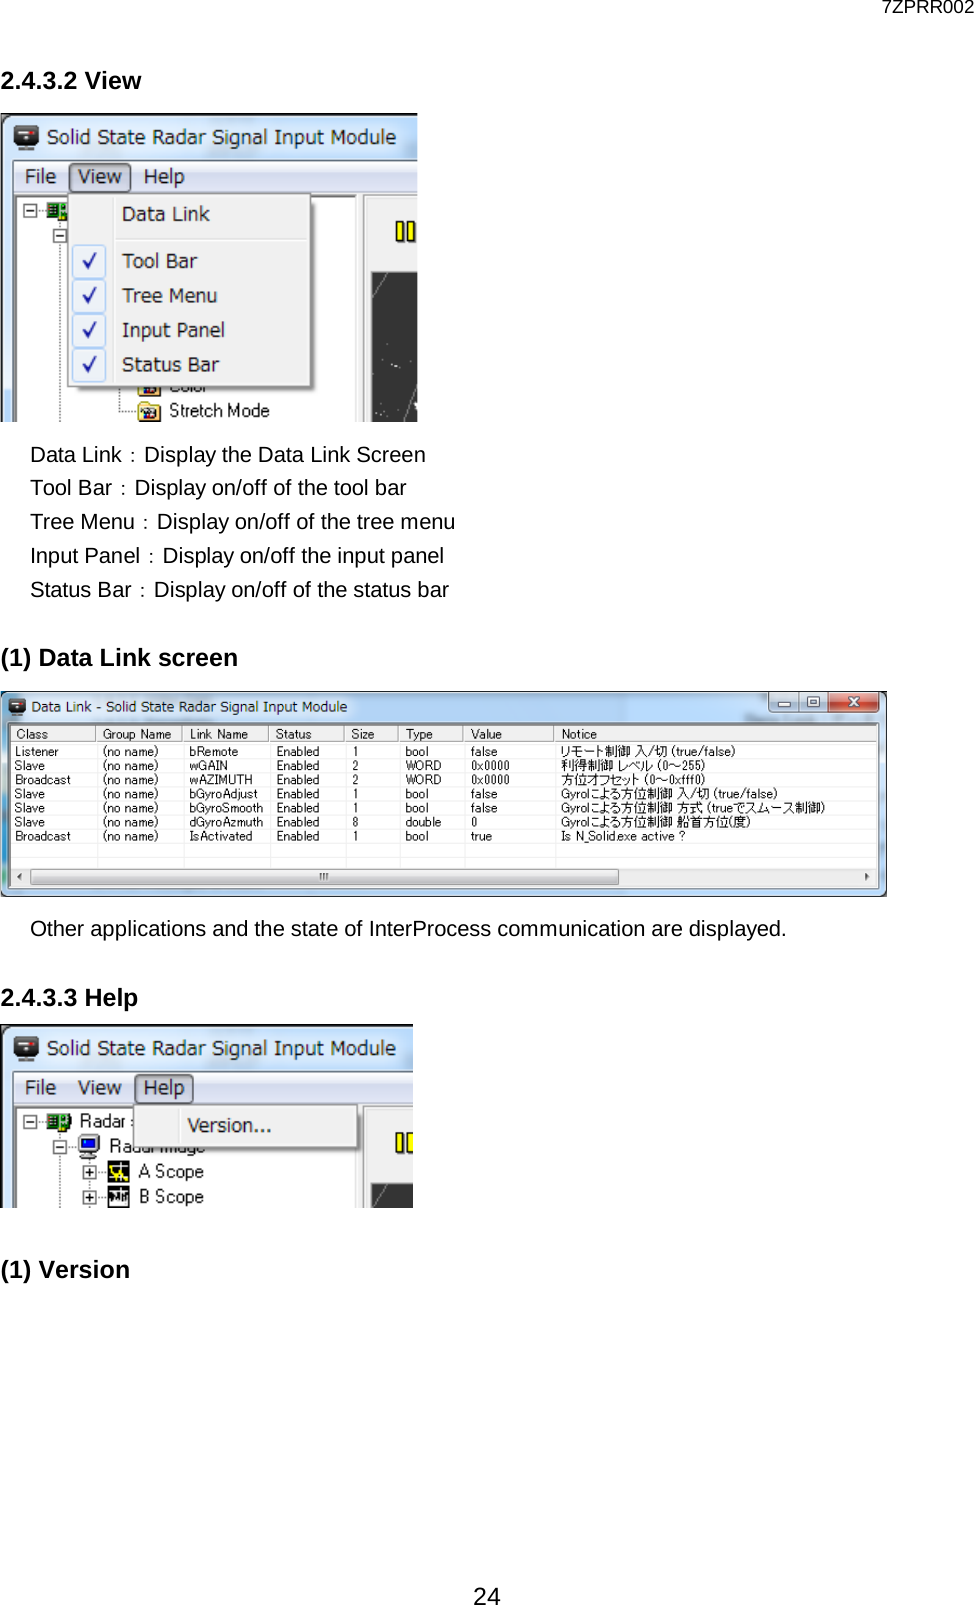  7ZPRR002 24 2.4.3.2 View  Data Link：Display the Data Link Screen Tool Bar：Display on/off of the tool bar Tree Menu：Display on/off of the tree menu Input Panel：Display on/off the input panel Status Bar：Display on/off of the status bar  (1) Data Link screen  Other applications and the state of InterProcess communication are displayed.    2.4.3.3 Help   (1) Version 